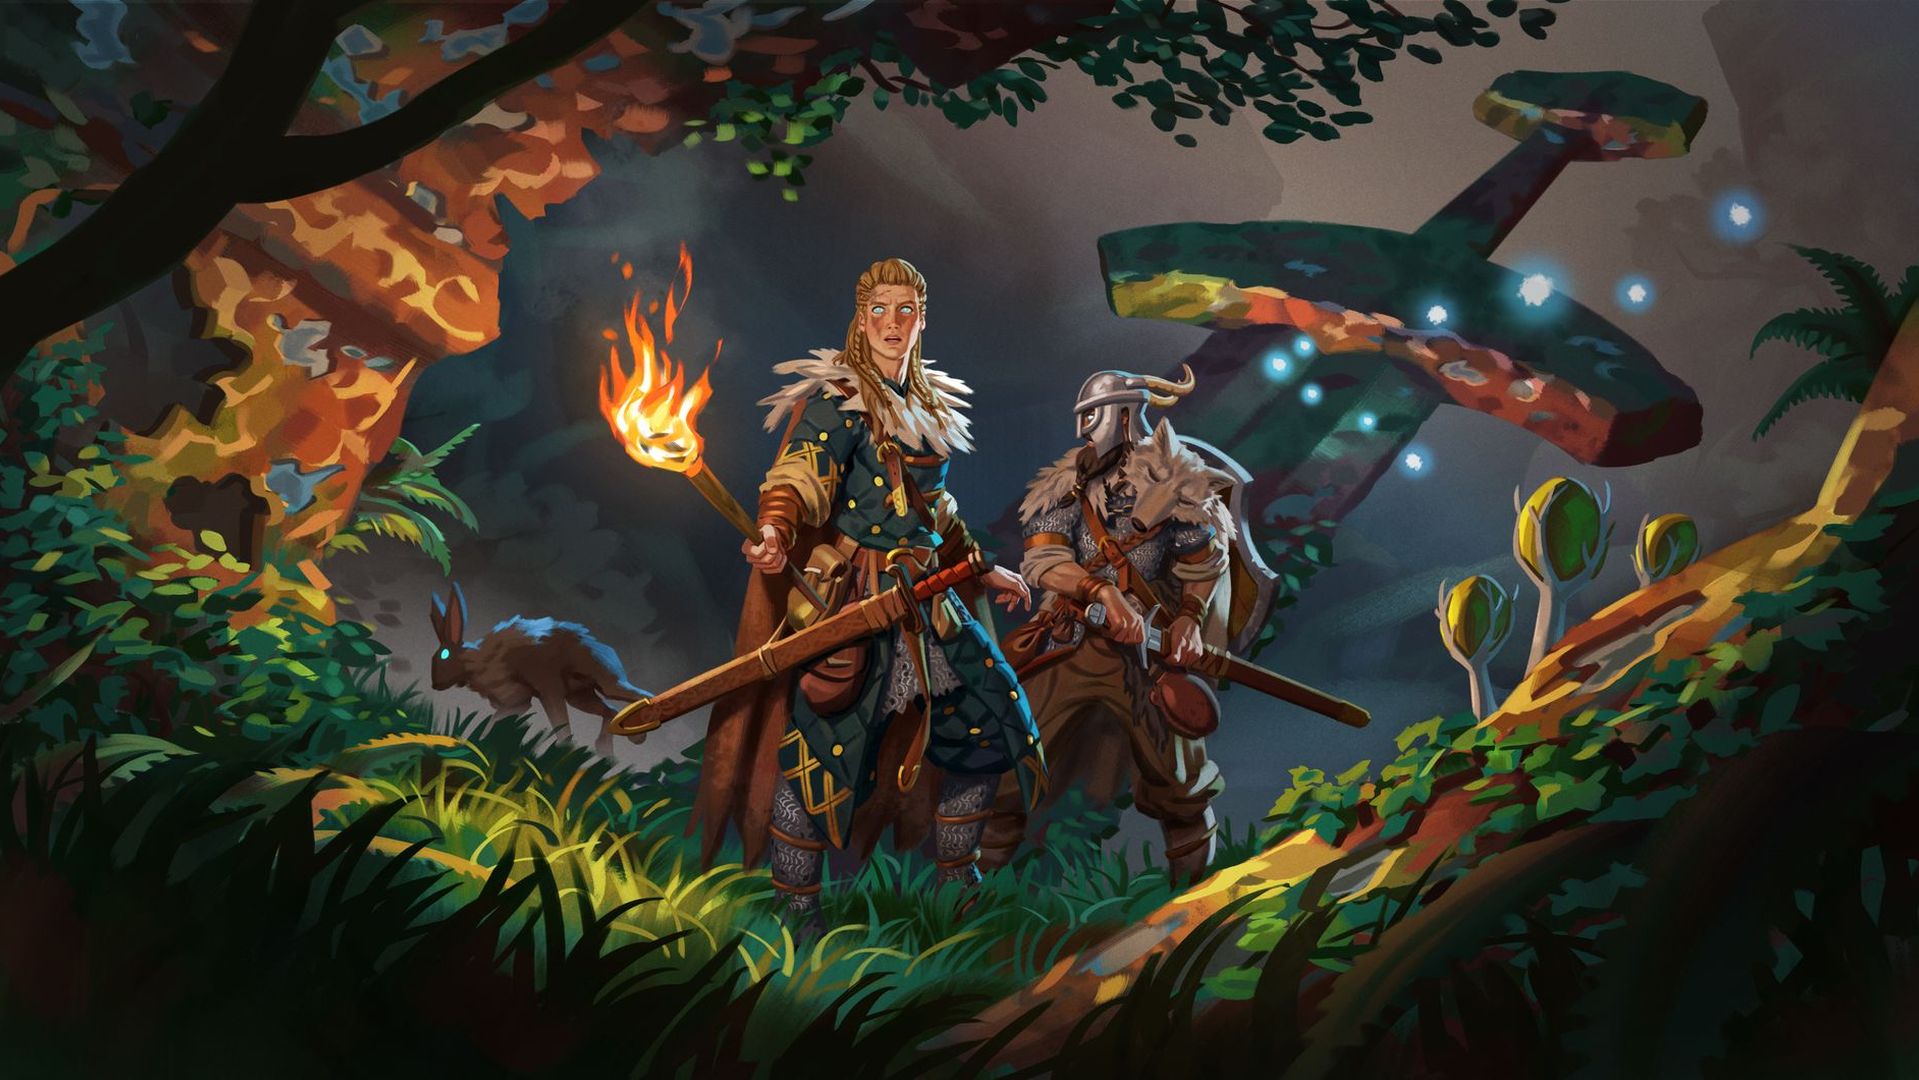 Valheim Developers Have no Current Plans for PlayStation, Nintendo Switch Release